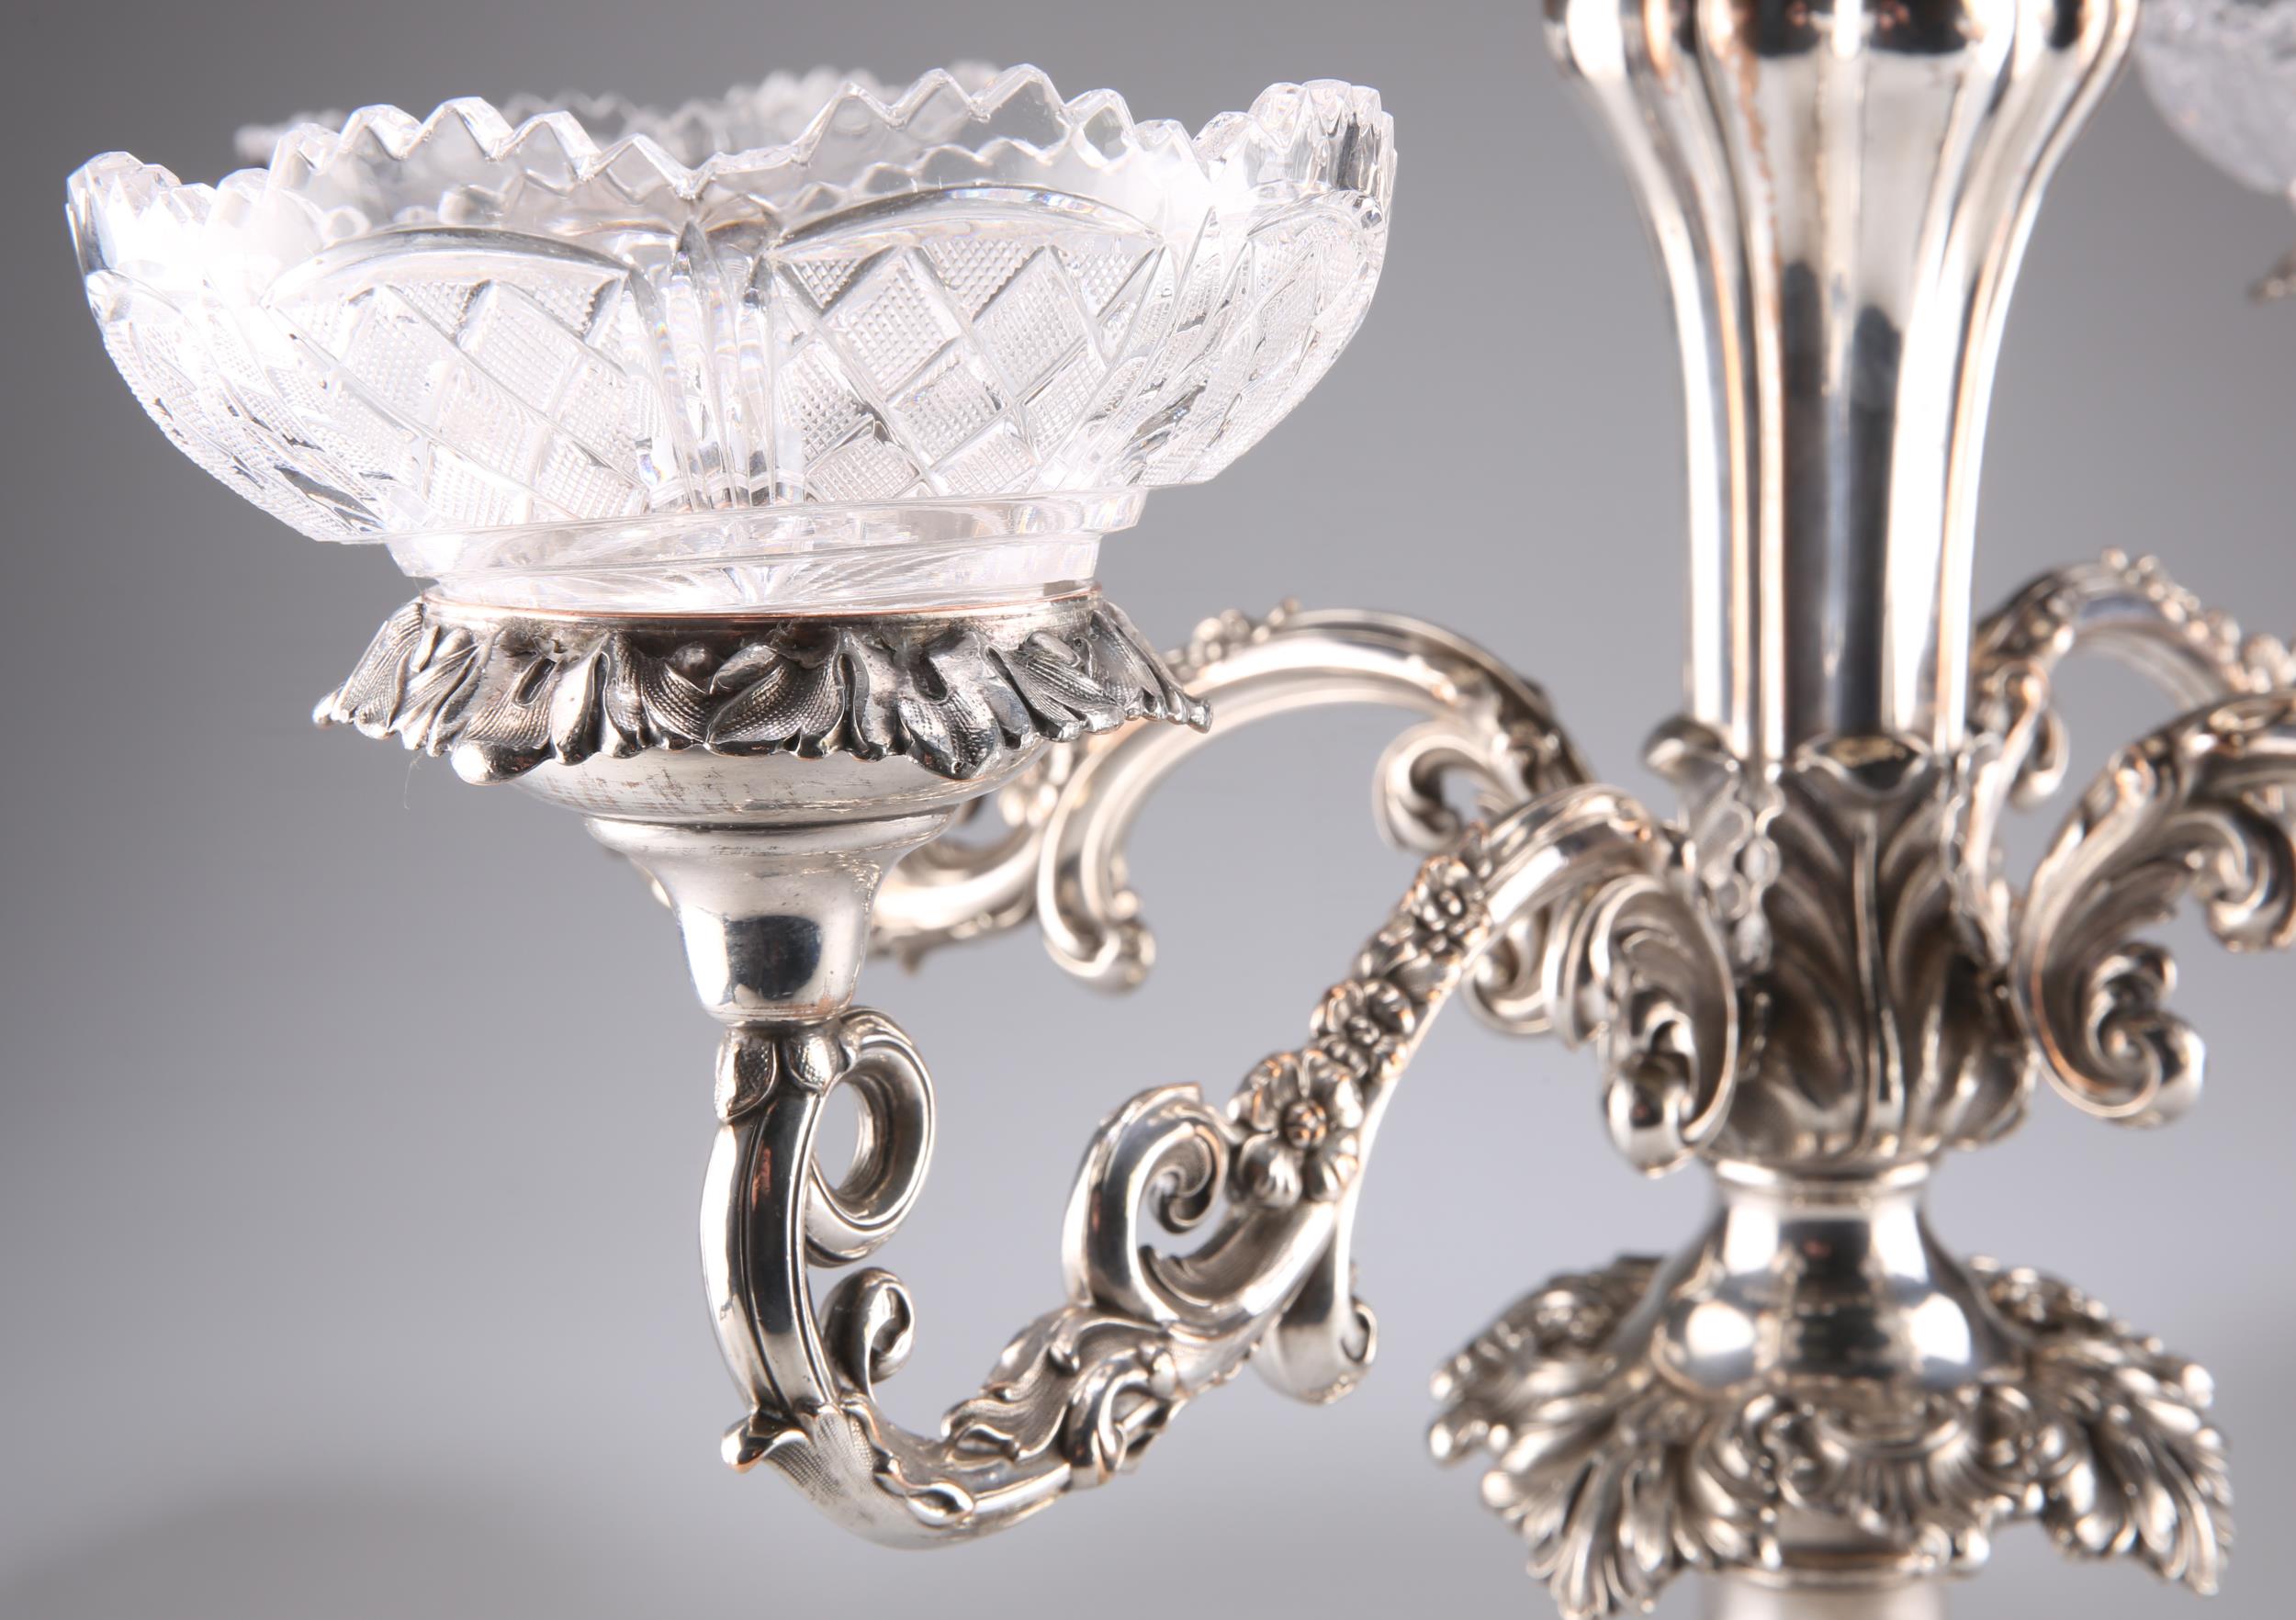 A FINE 19TH CENTURY SILVER-PLATED CENTREPIECE - Image 2 of 2